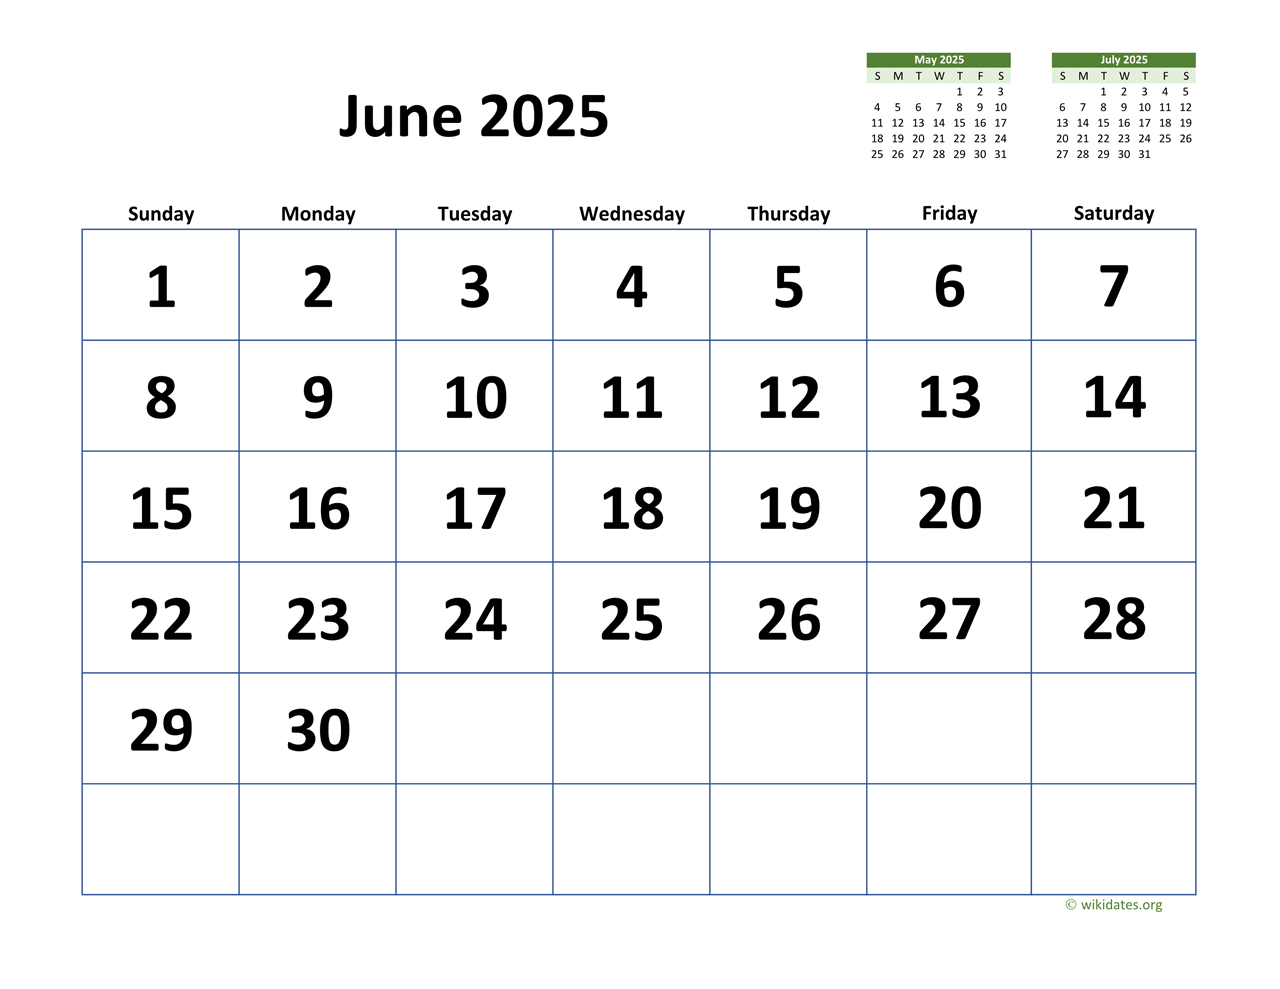 June 2025 Calendar with Extralarge Dates